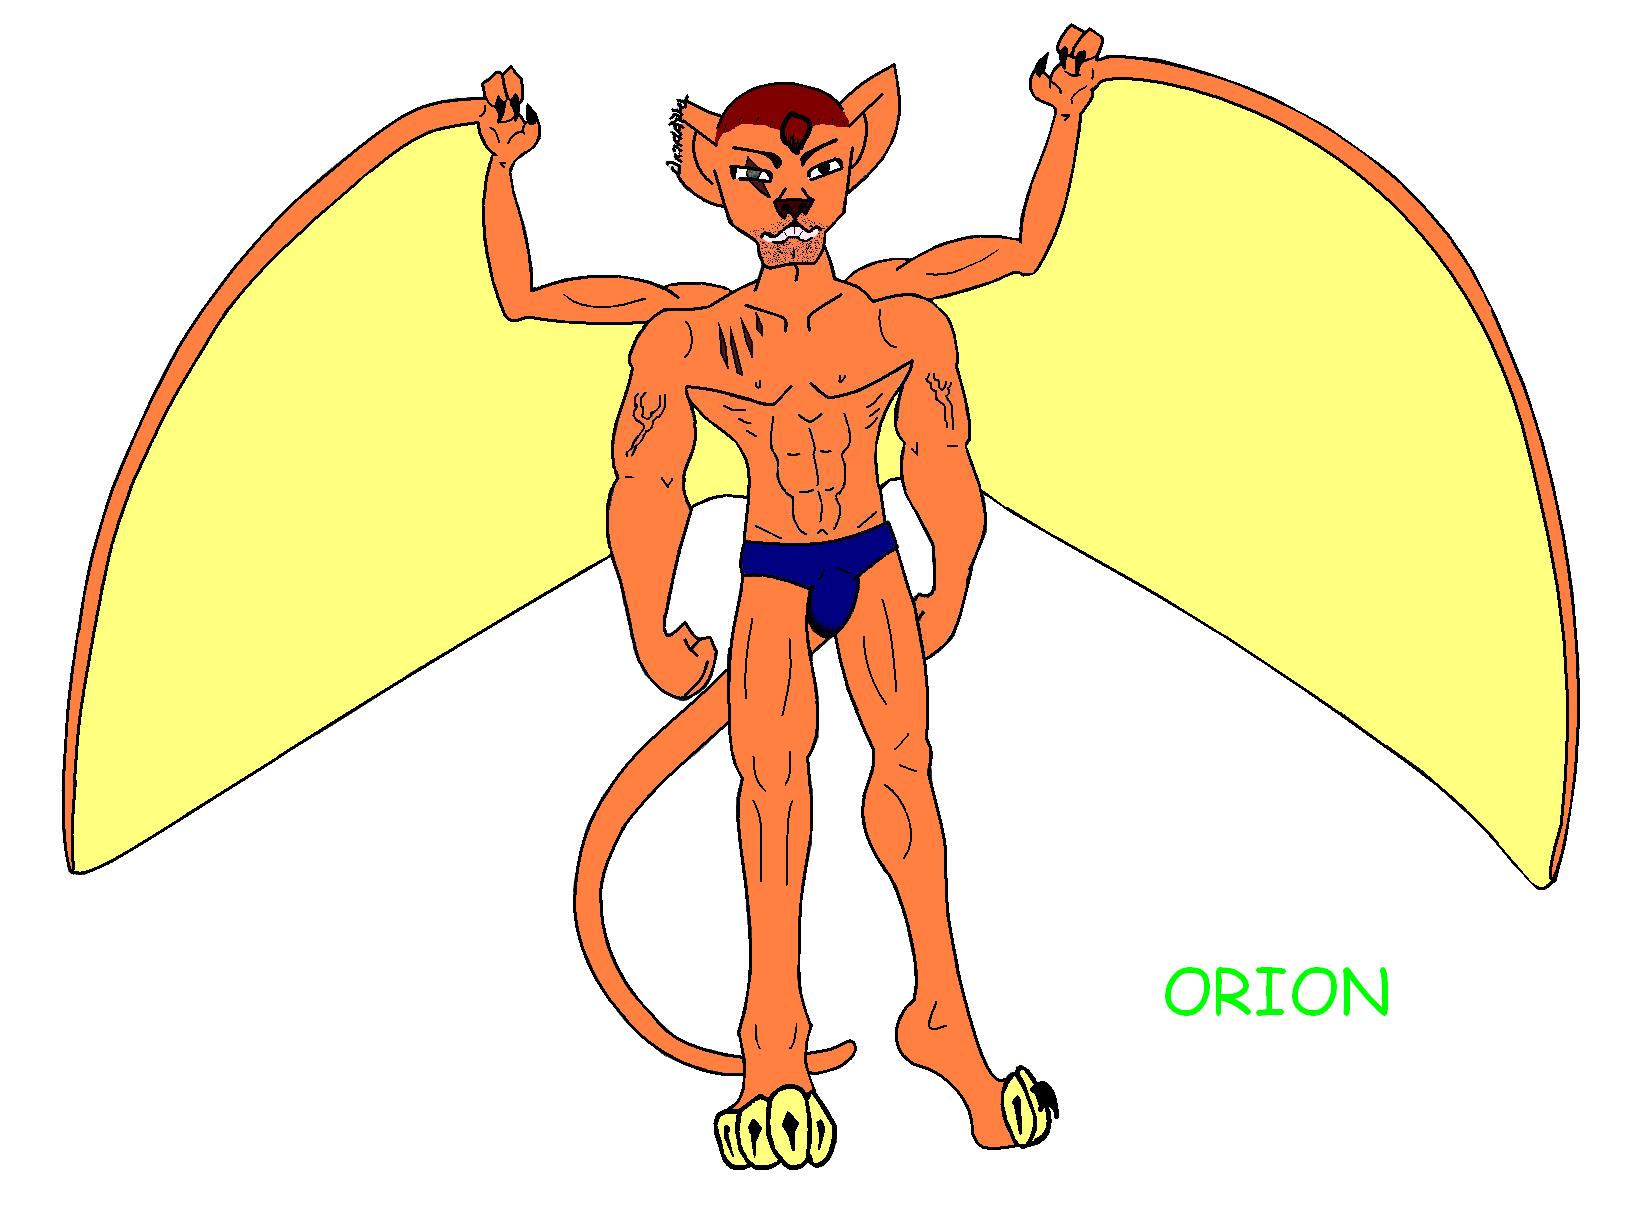 orion by demonfang